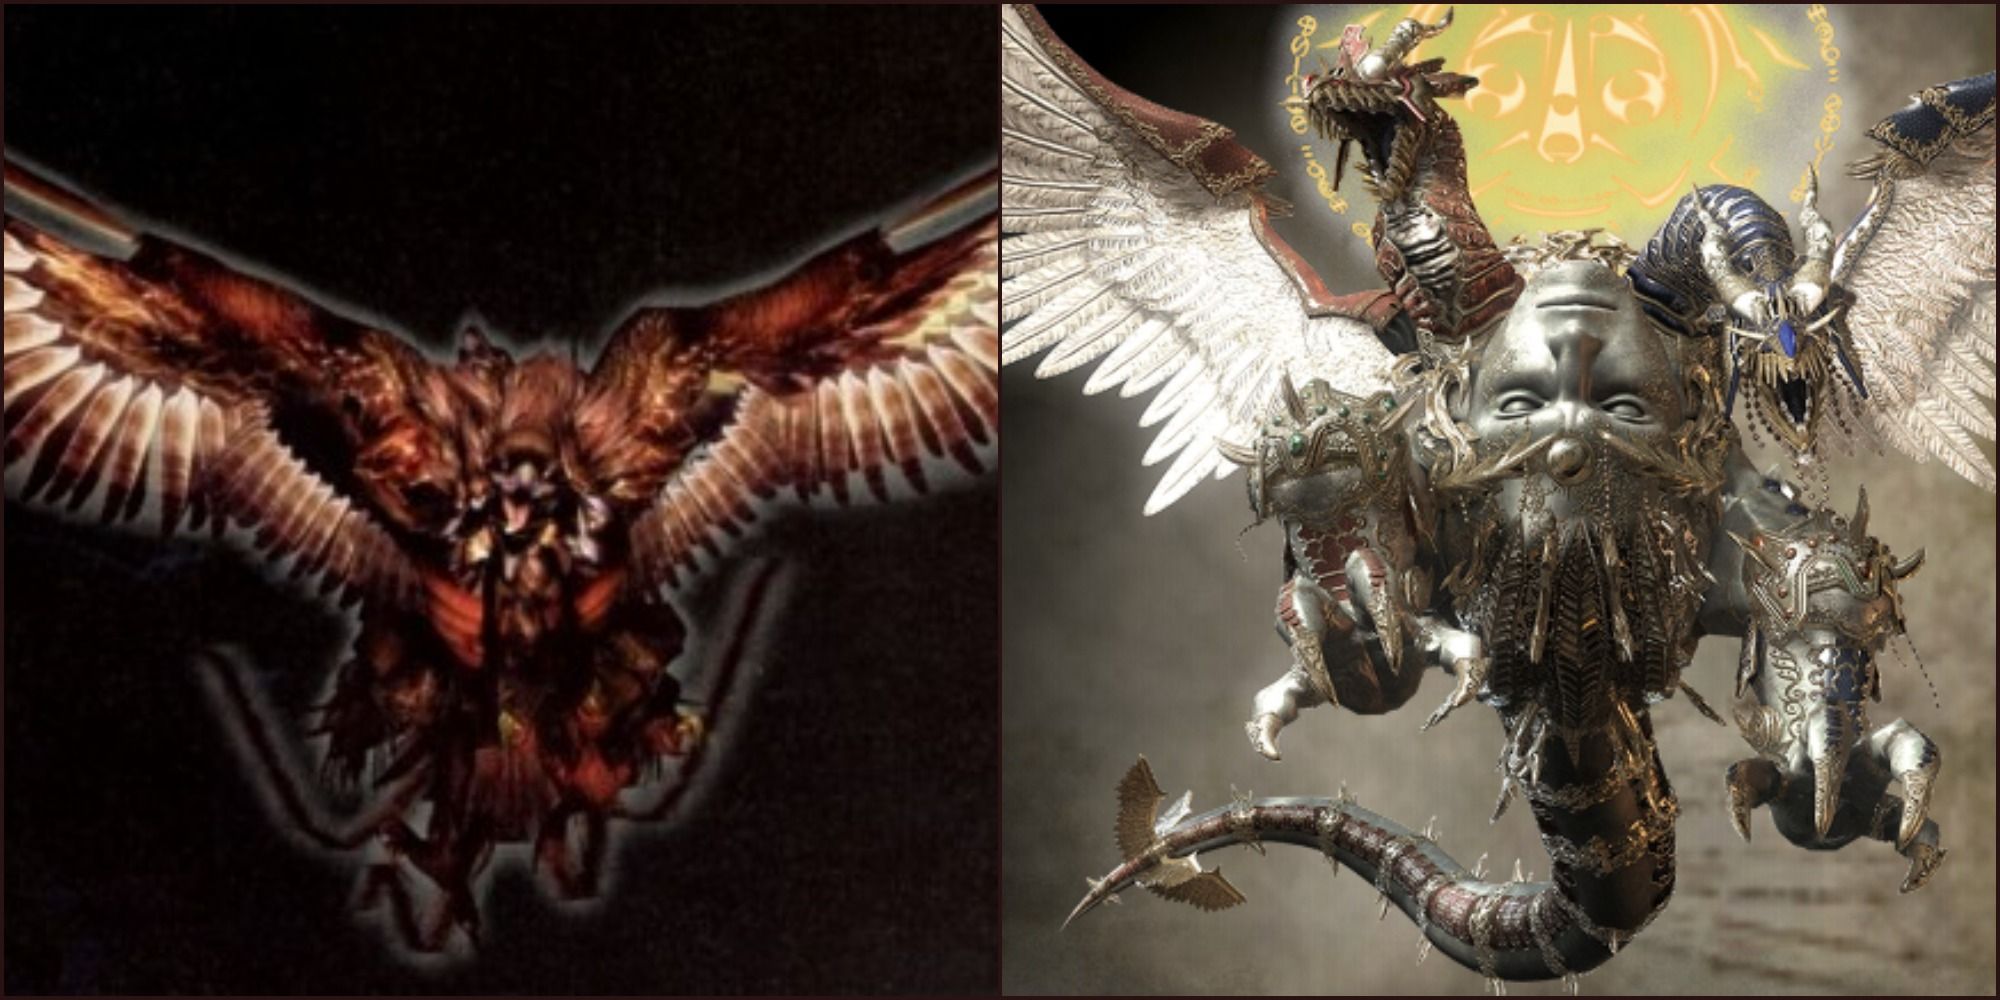 Griffon from Devil May Cry and Fortitudo from Bayonetta from left to right both in flight